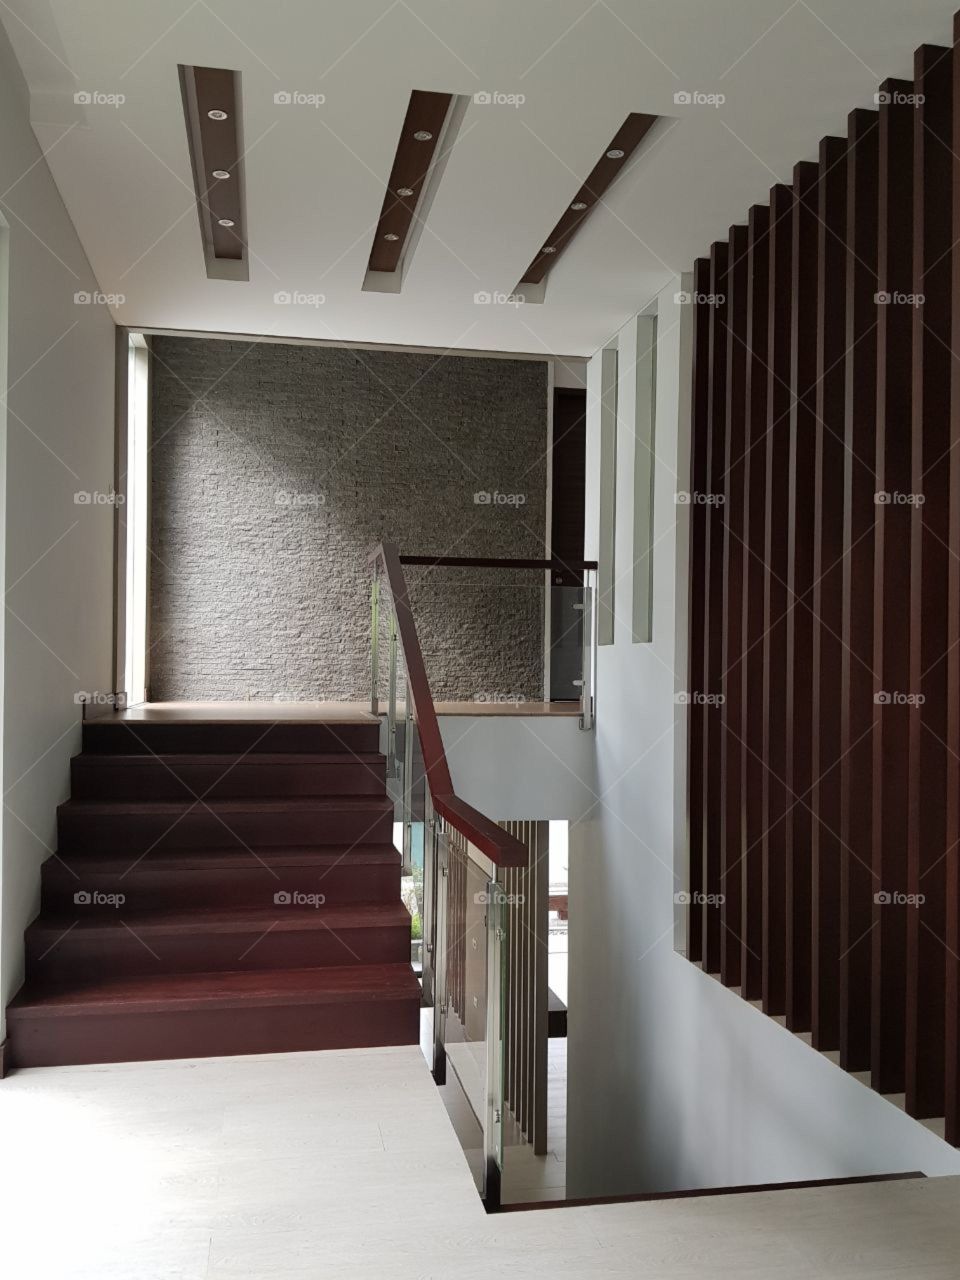 woodennstair and wall